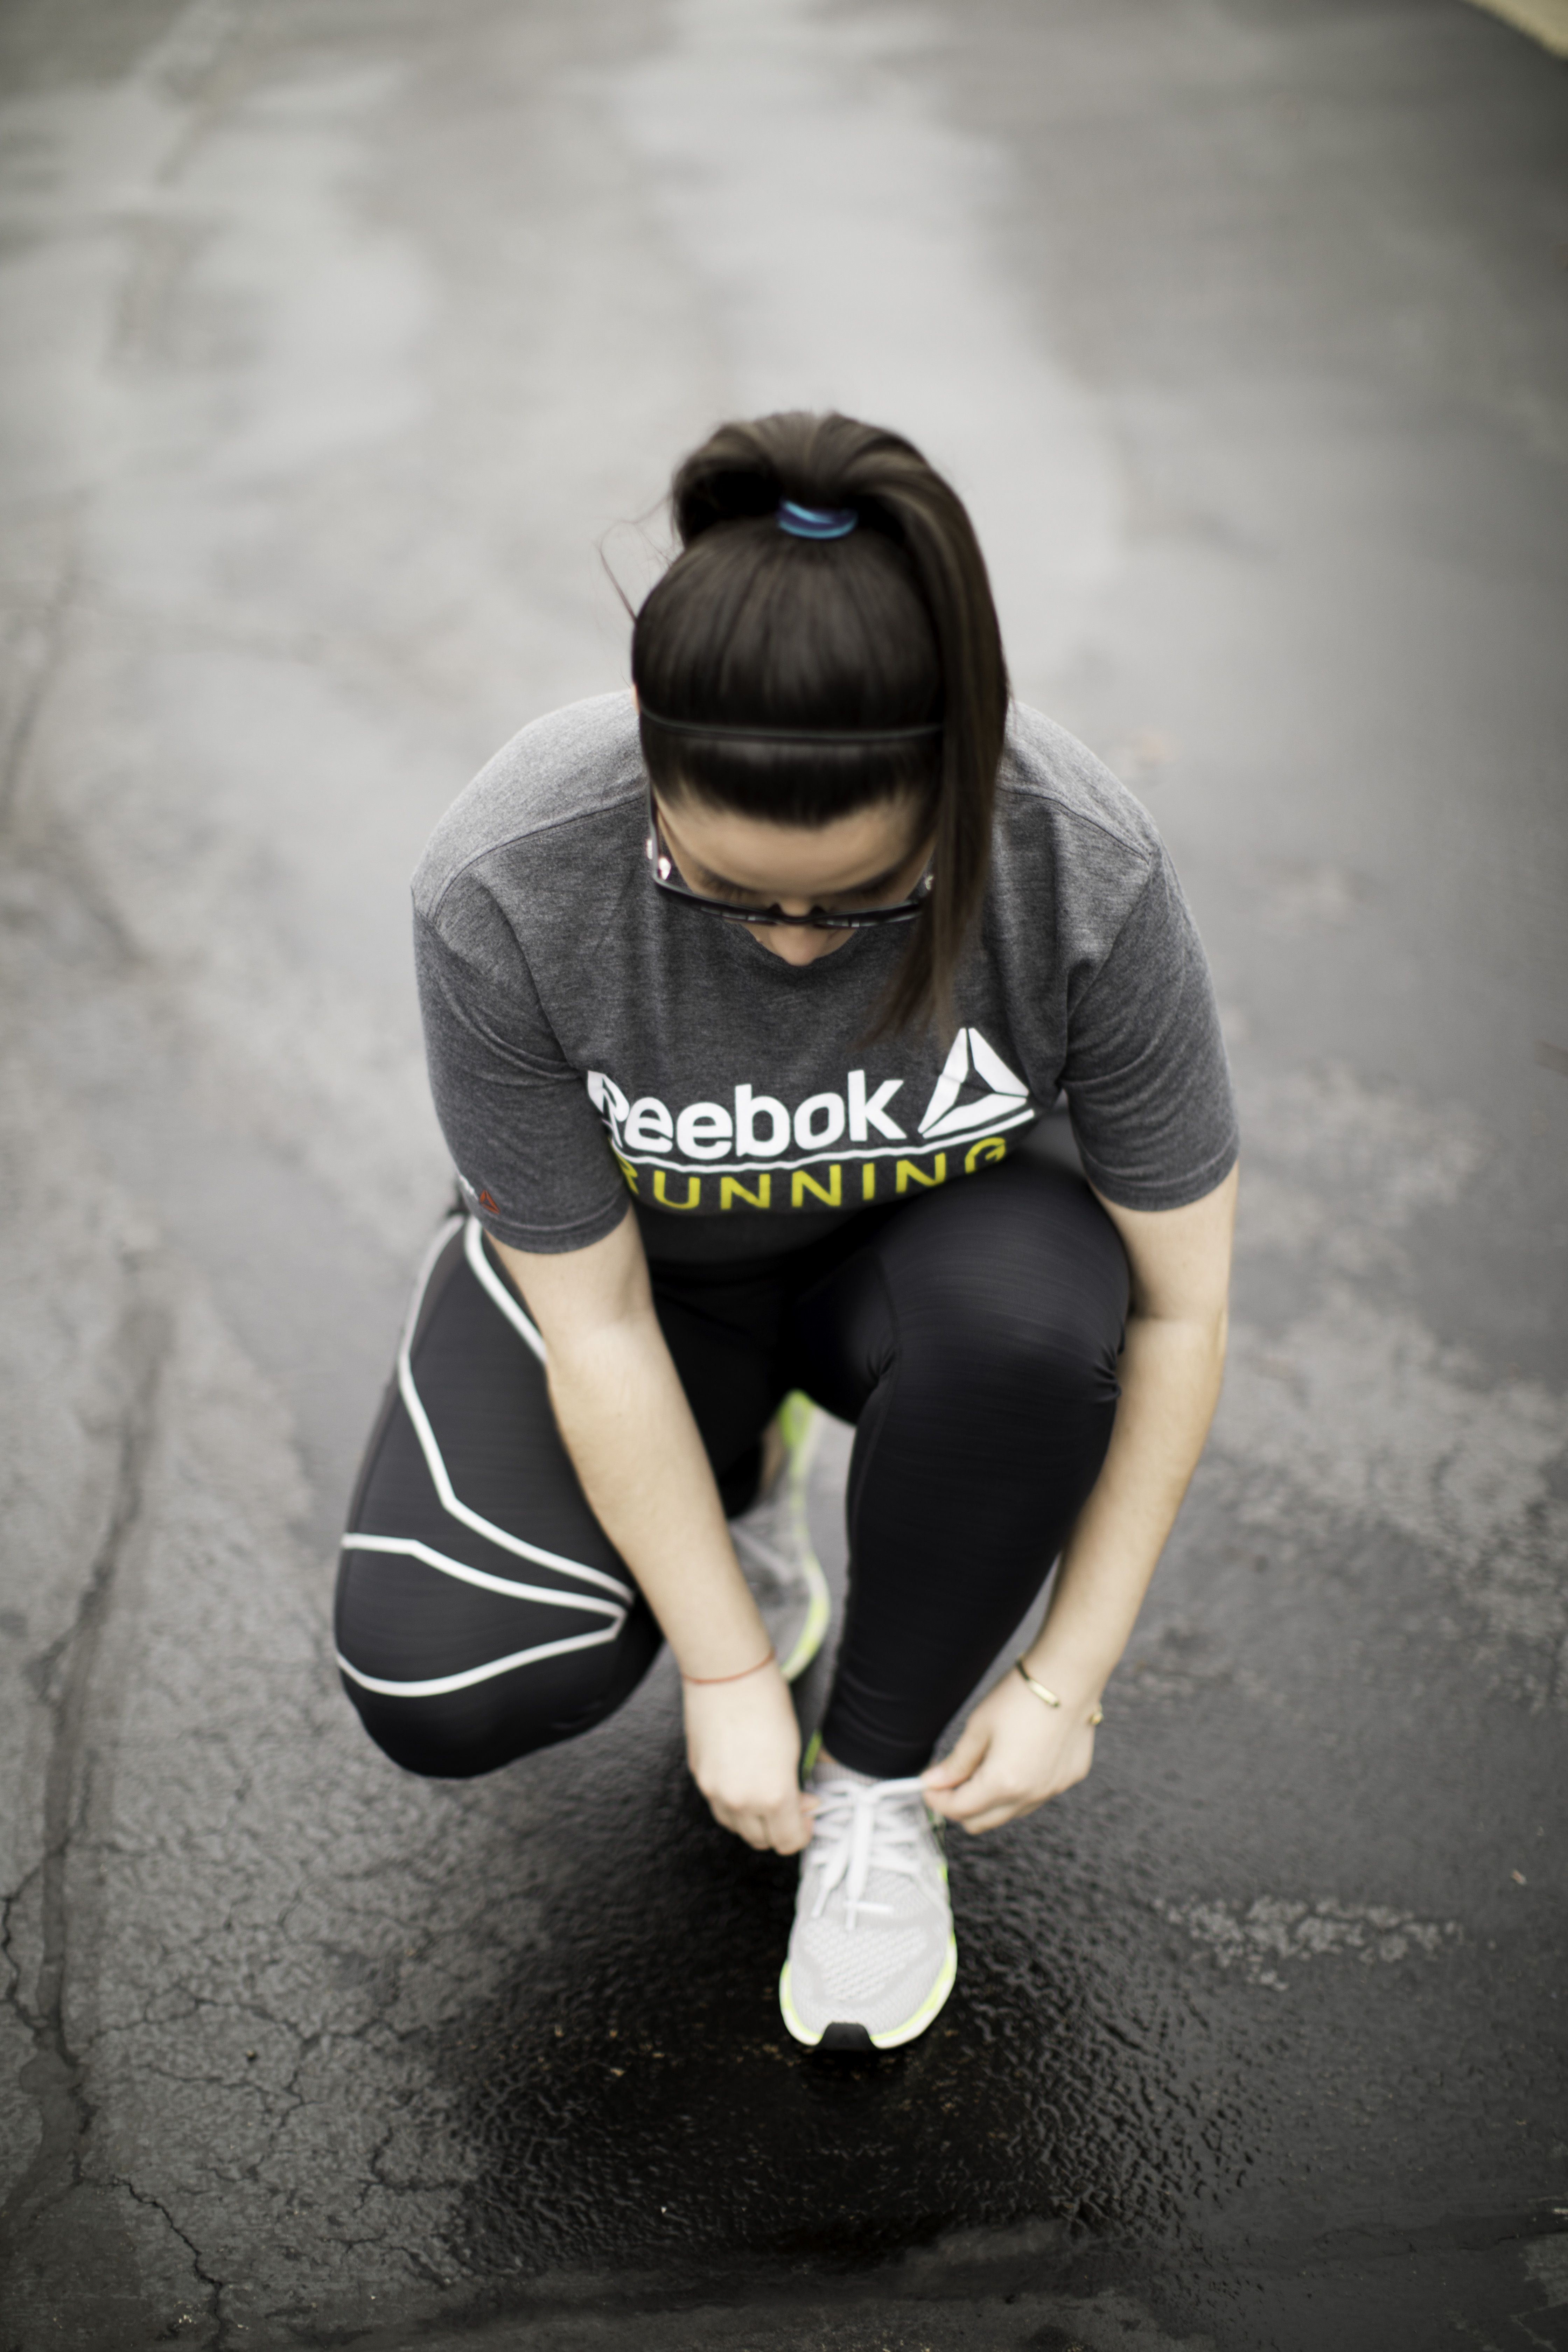 float through your run with Reebok Floatride, the ultimate running shoe, best running shoe, comfortable running shoe, reebok running shoe